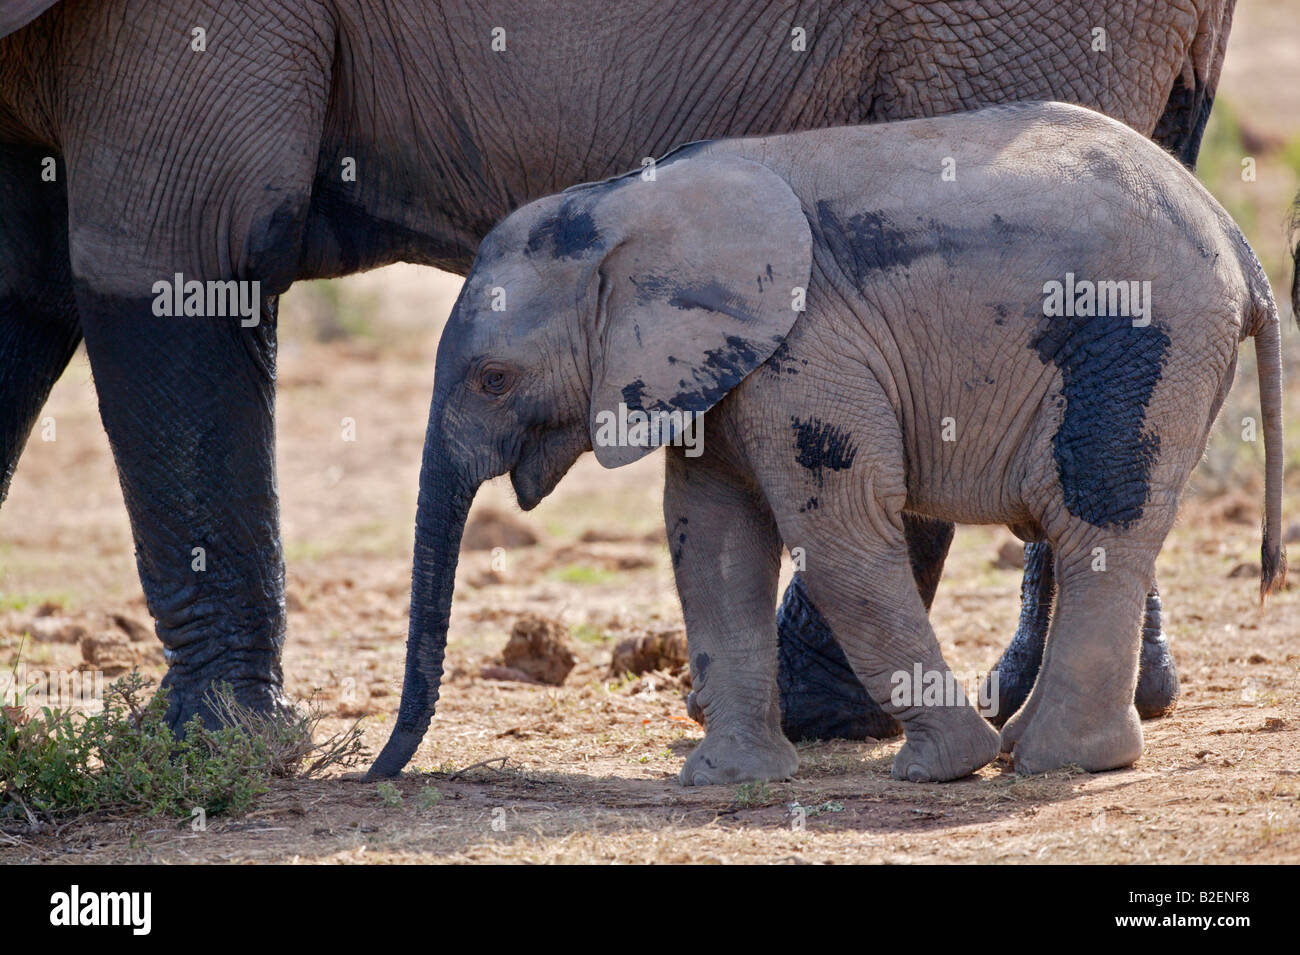 A baby elephant standing alongside its mother Stock Photo